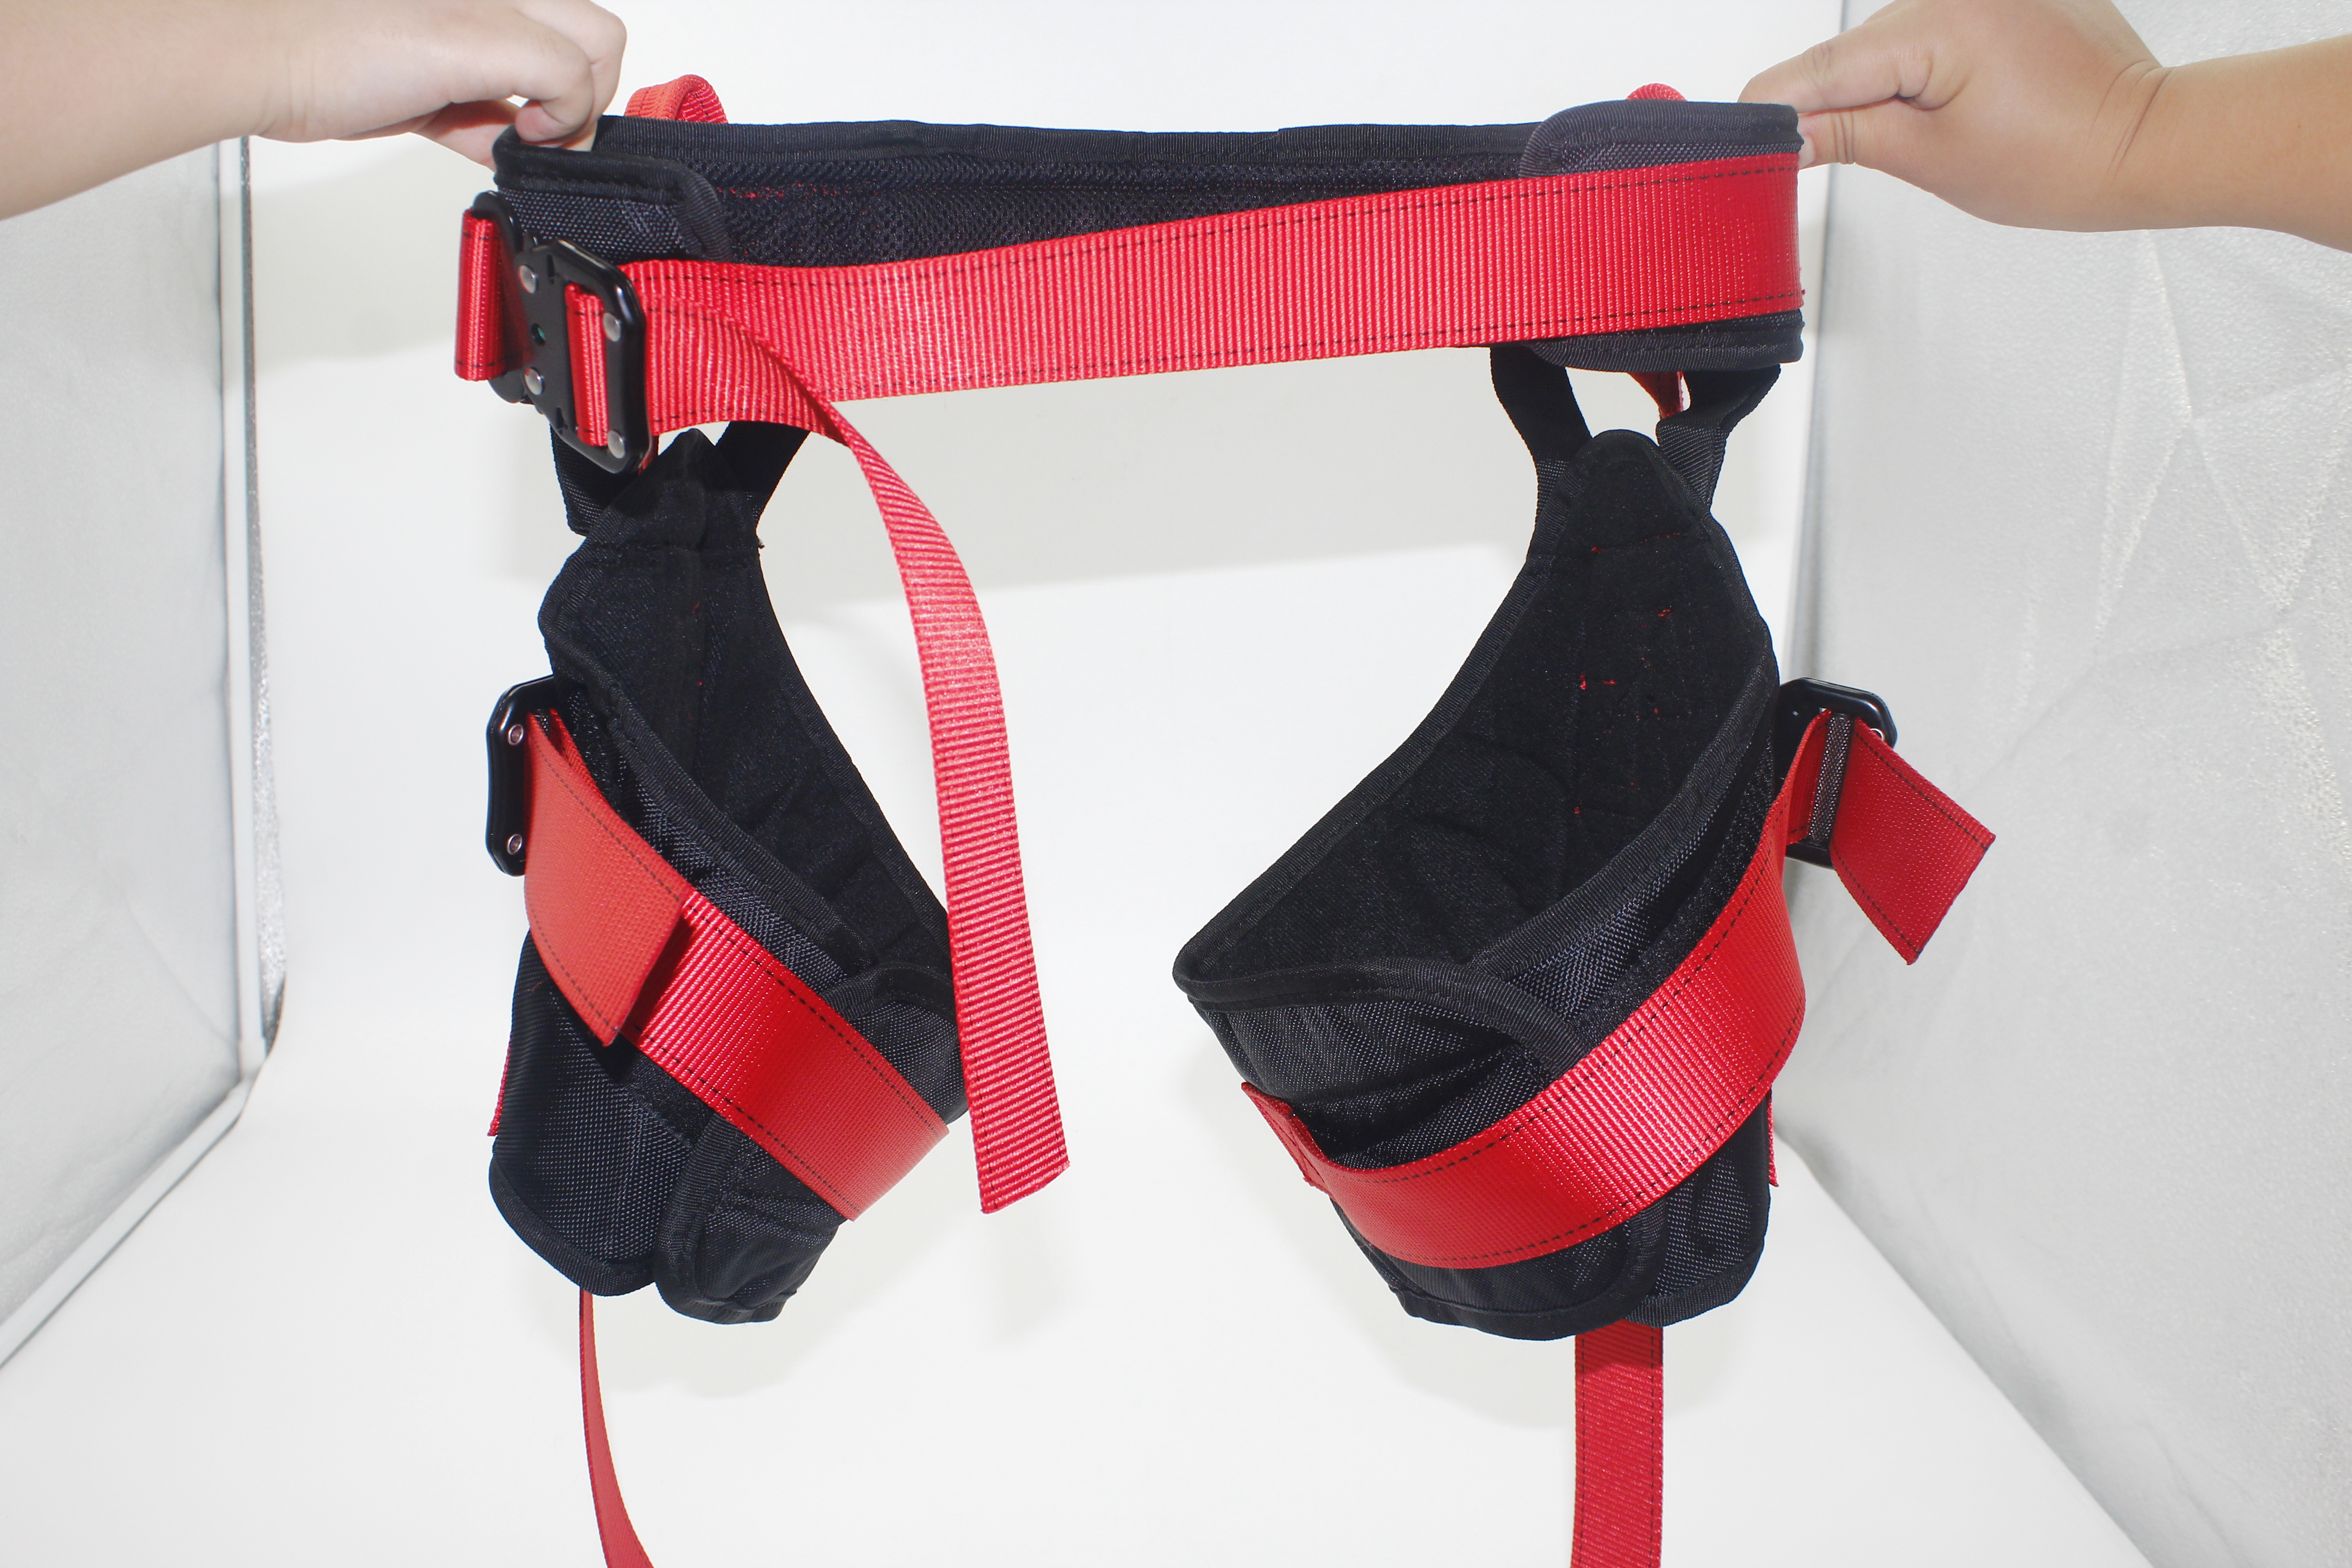 Factory Price Bungee Harness For Jumping, Climbing, Trampoline Half Body Safety Harness Teenagers Adults